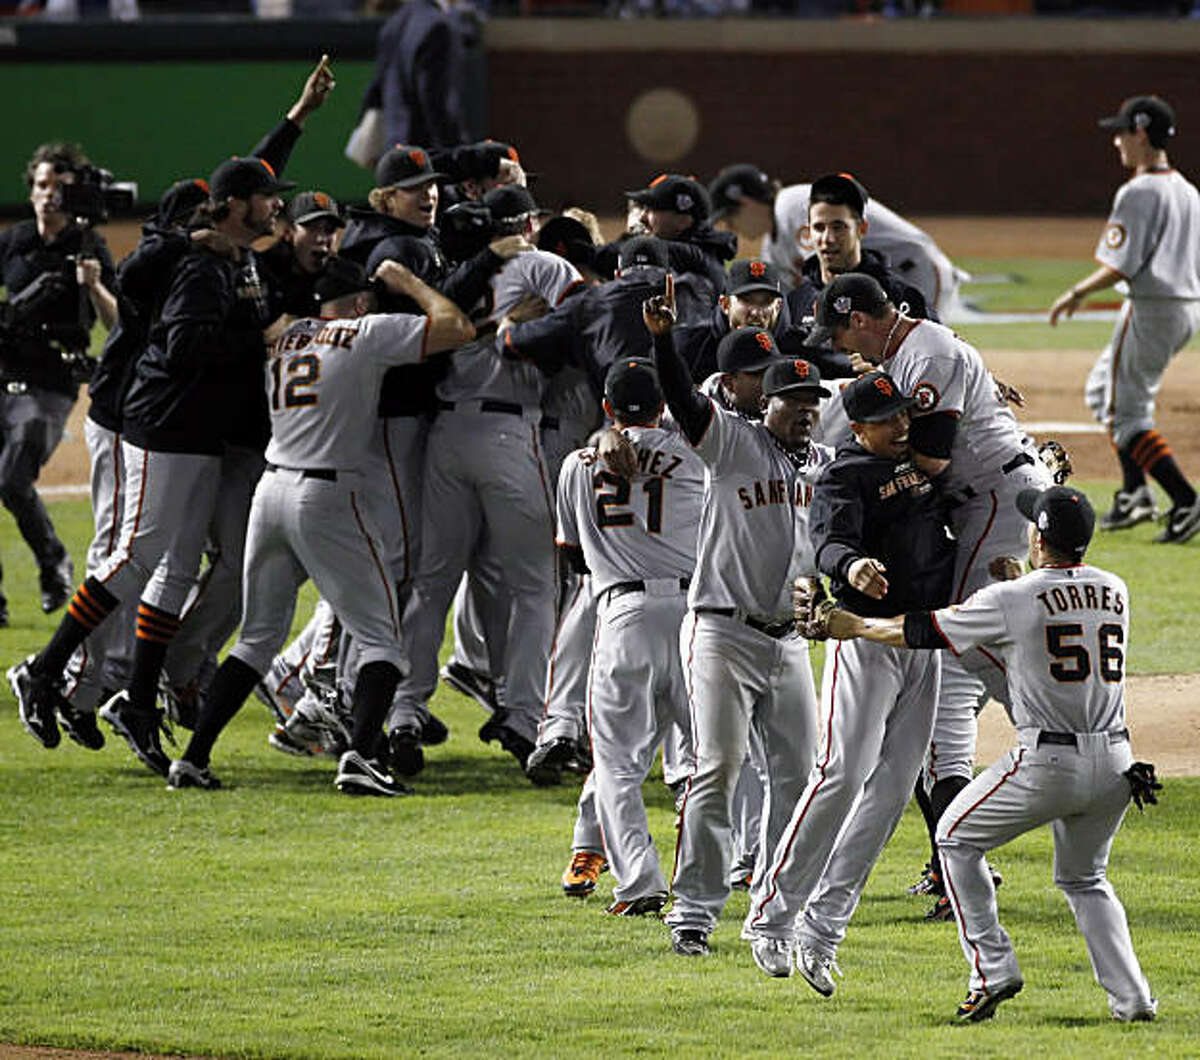 The Giants celebrate on the field after winning the final game of the World Series. The San Francisco Giants defeated the Texas Rangers 3-1 in Game 5 of the World Series at Rangers Ballpark in Arlington, Tx, on Monday, November 1, 2010.